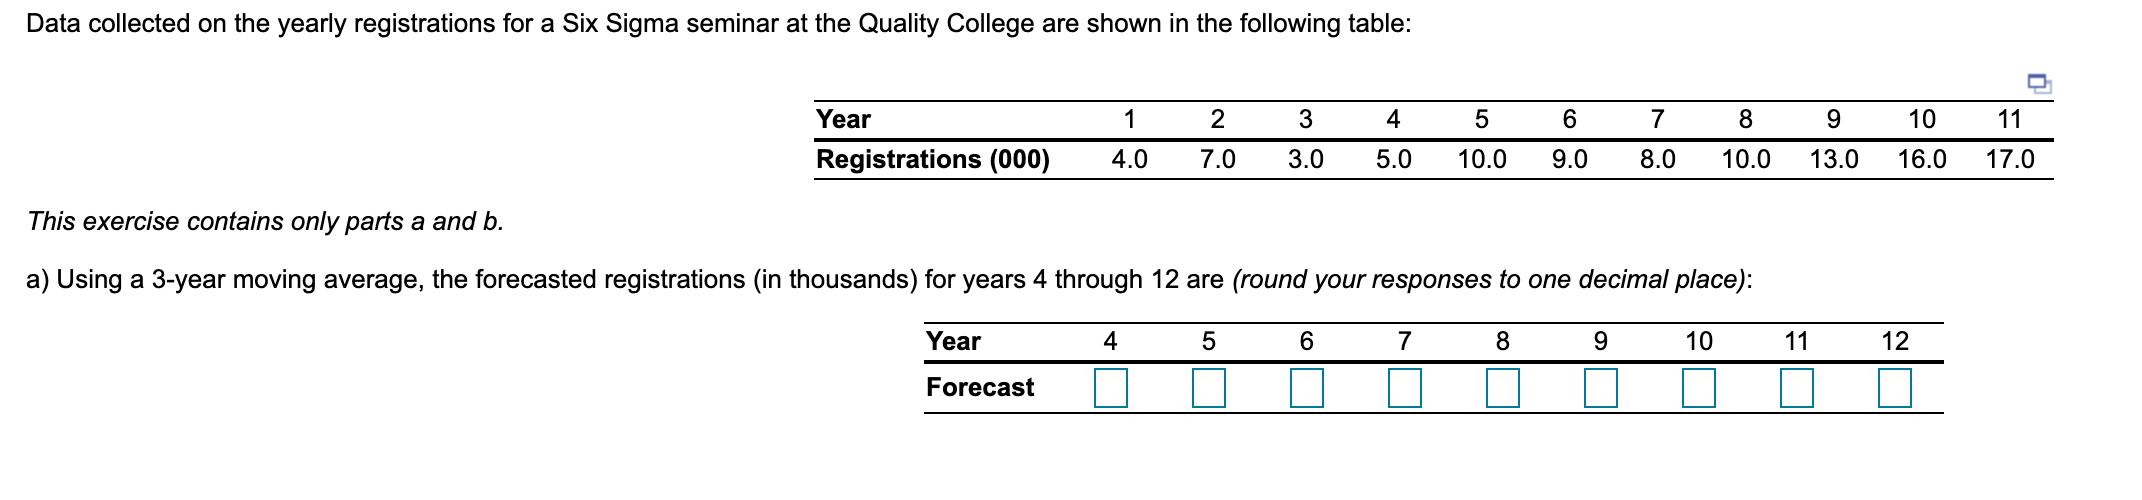 Data collected on the yearly registrations for a Six Sigma seminar at the Quality College are shown in the following table:Y